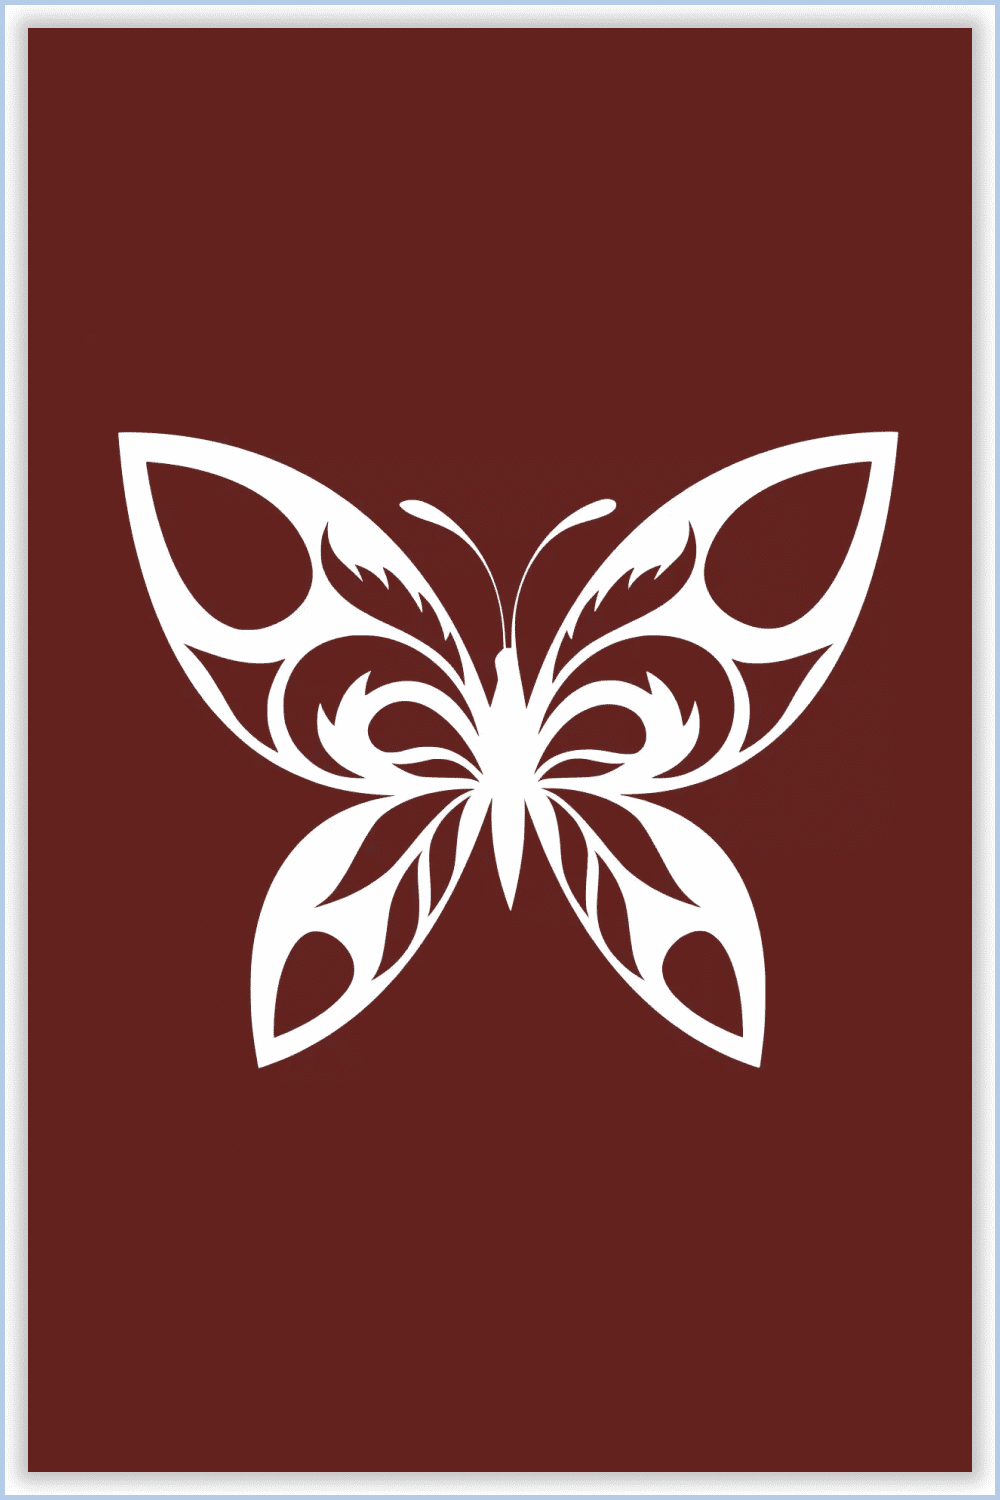 White butterfly with sharp wings on a burgundy background.